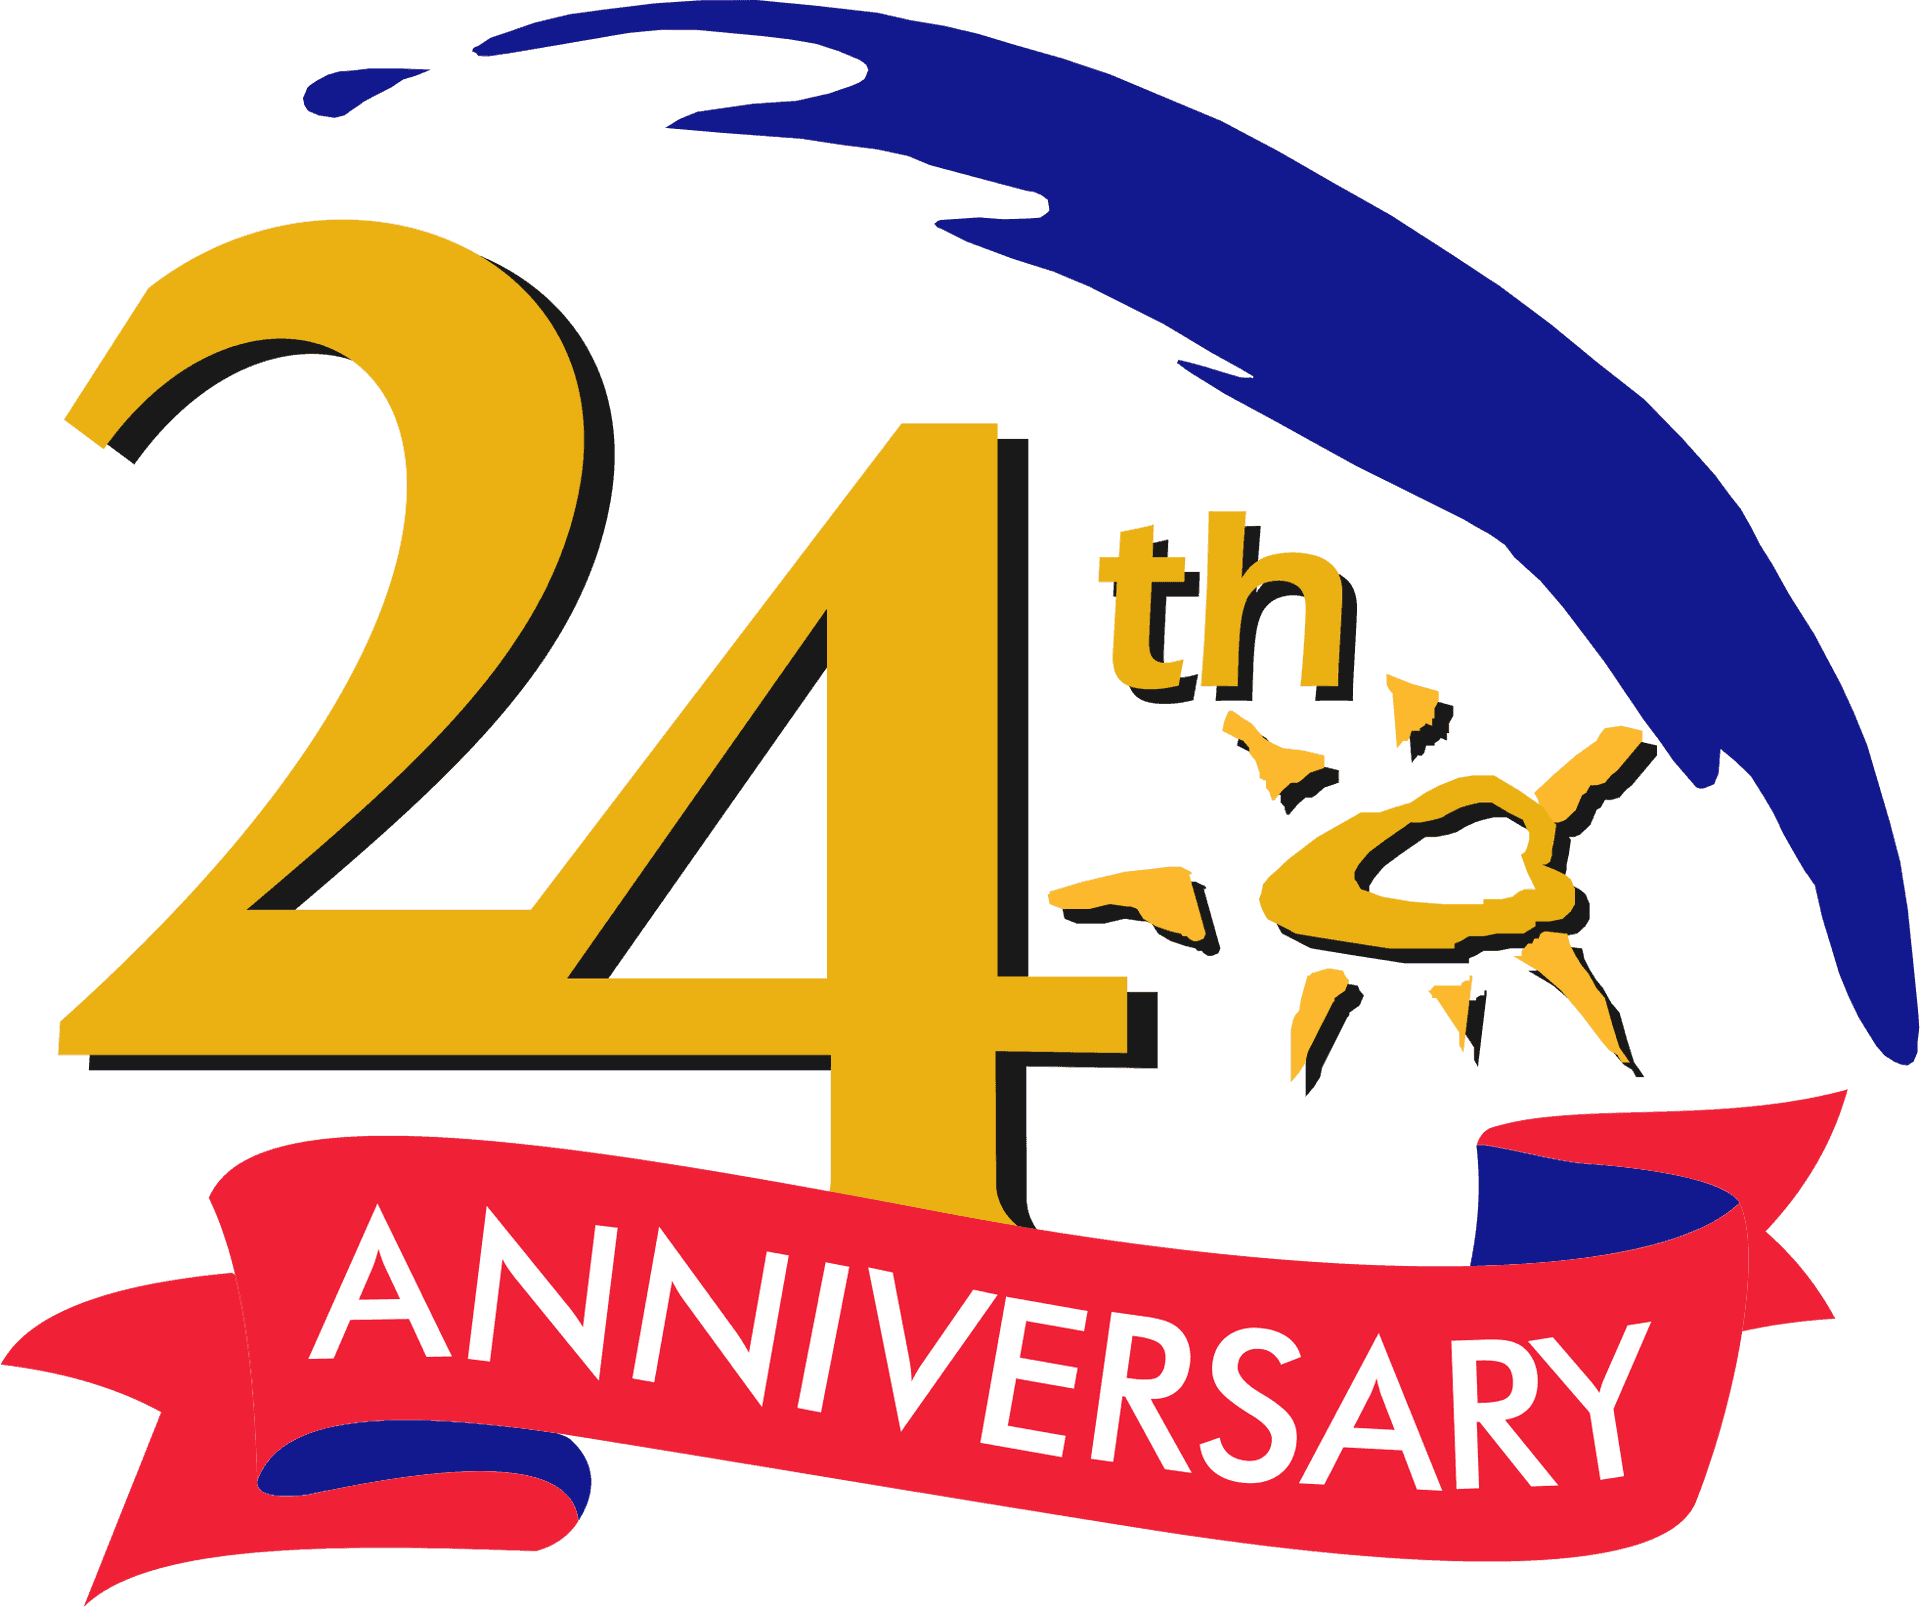 24th Anniversary Celebration Graphic PNG image